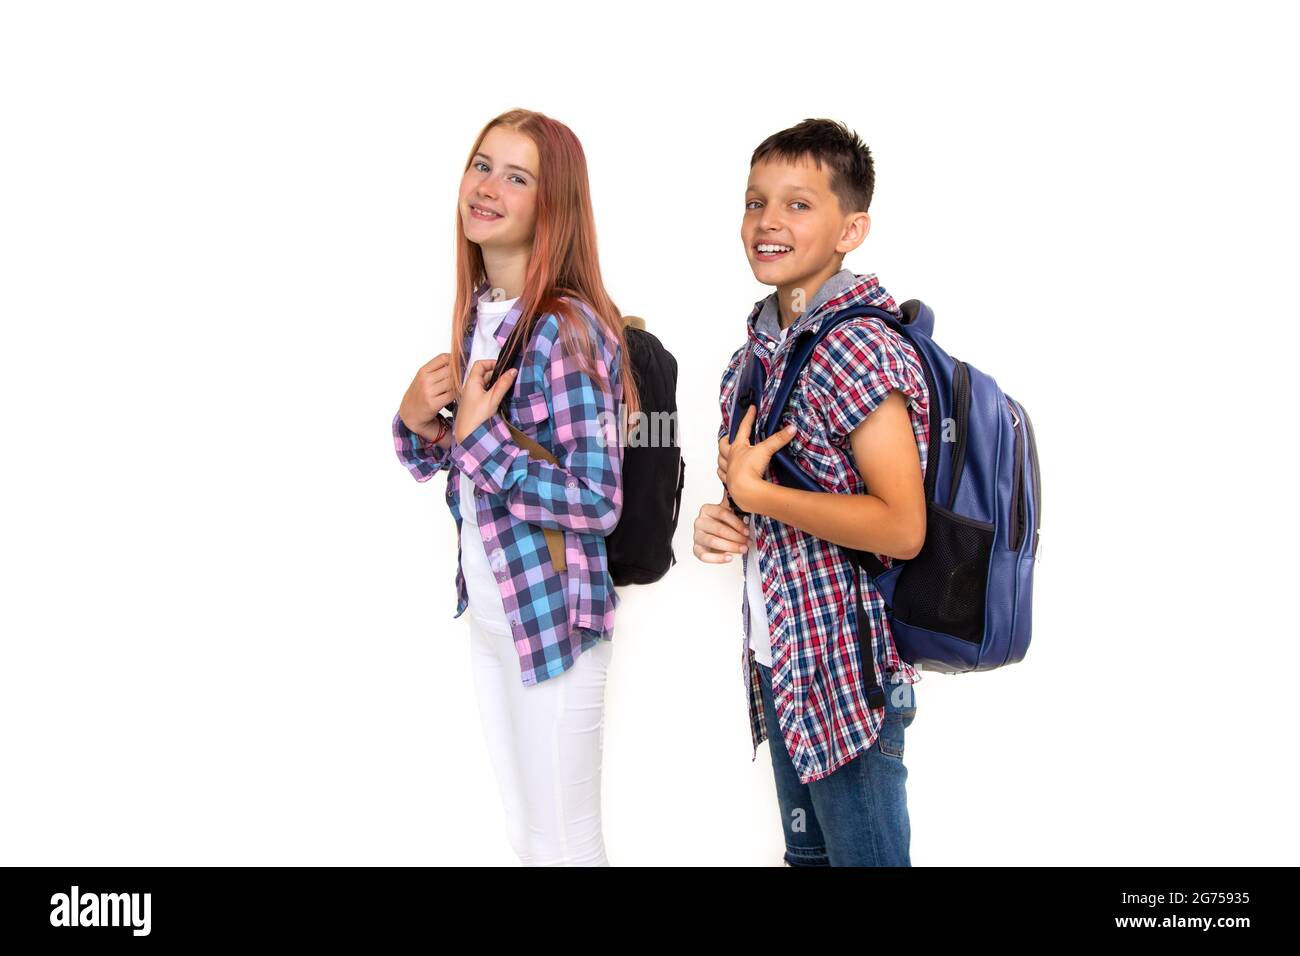 Boy and girl teenager 11 years old schoolboy and schoolgirl looking at camera on white background with backpacks and smiling. Dressed in plaid shirt, Stock Photo